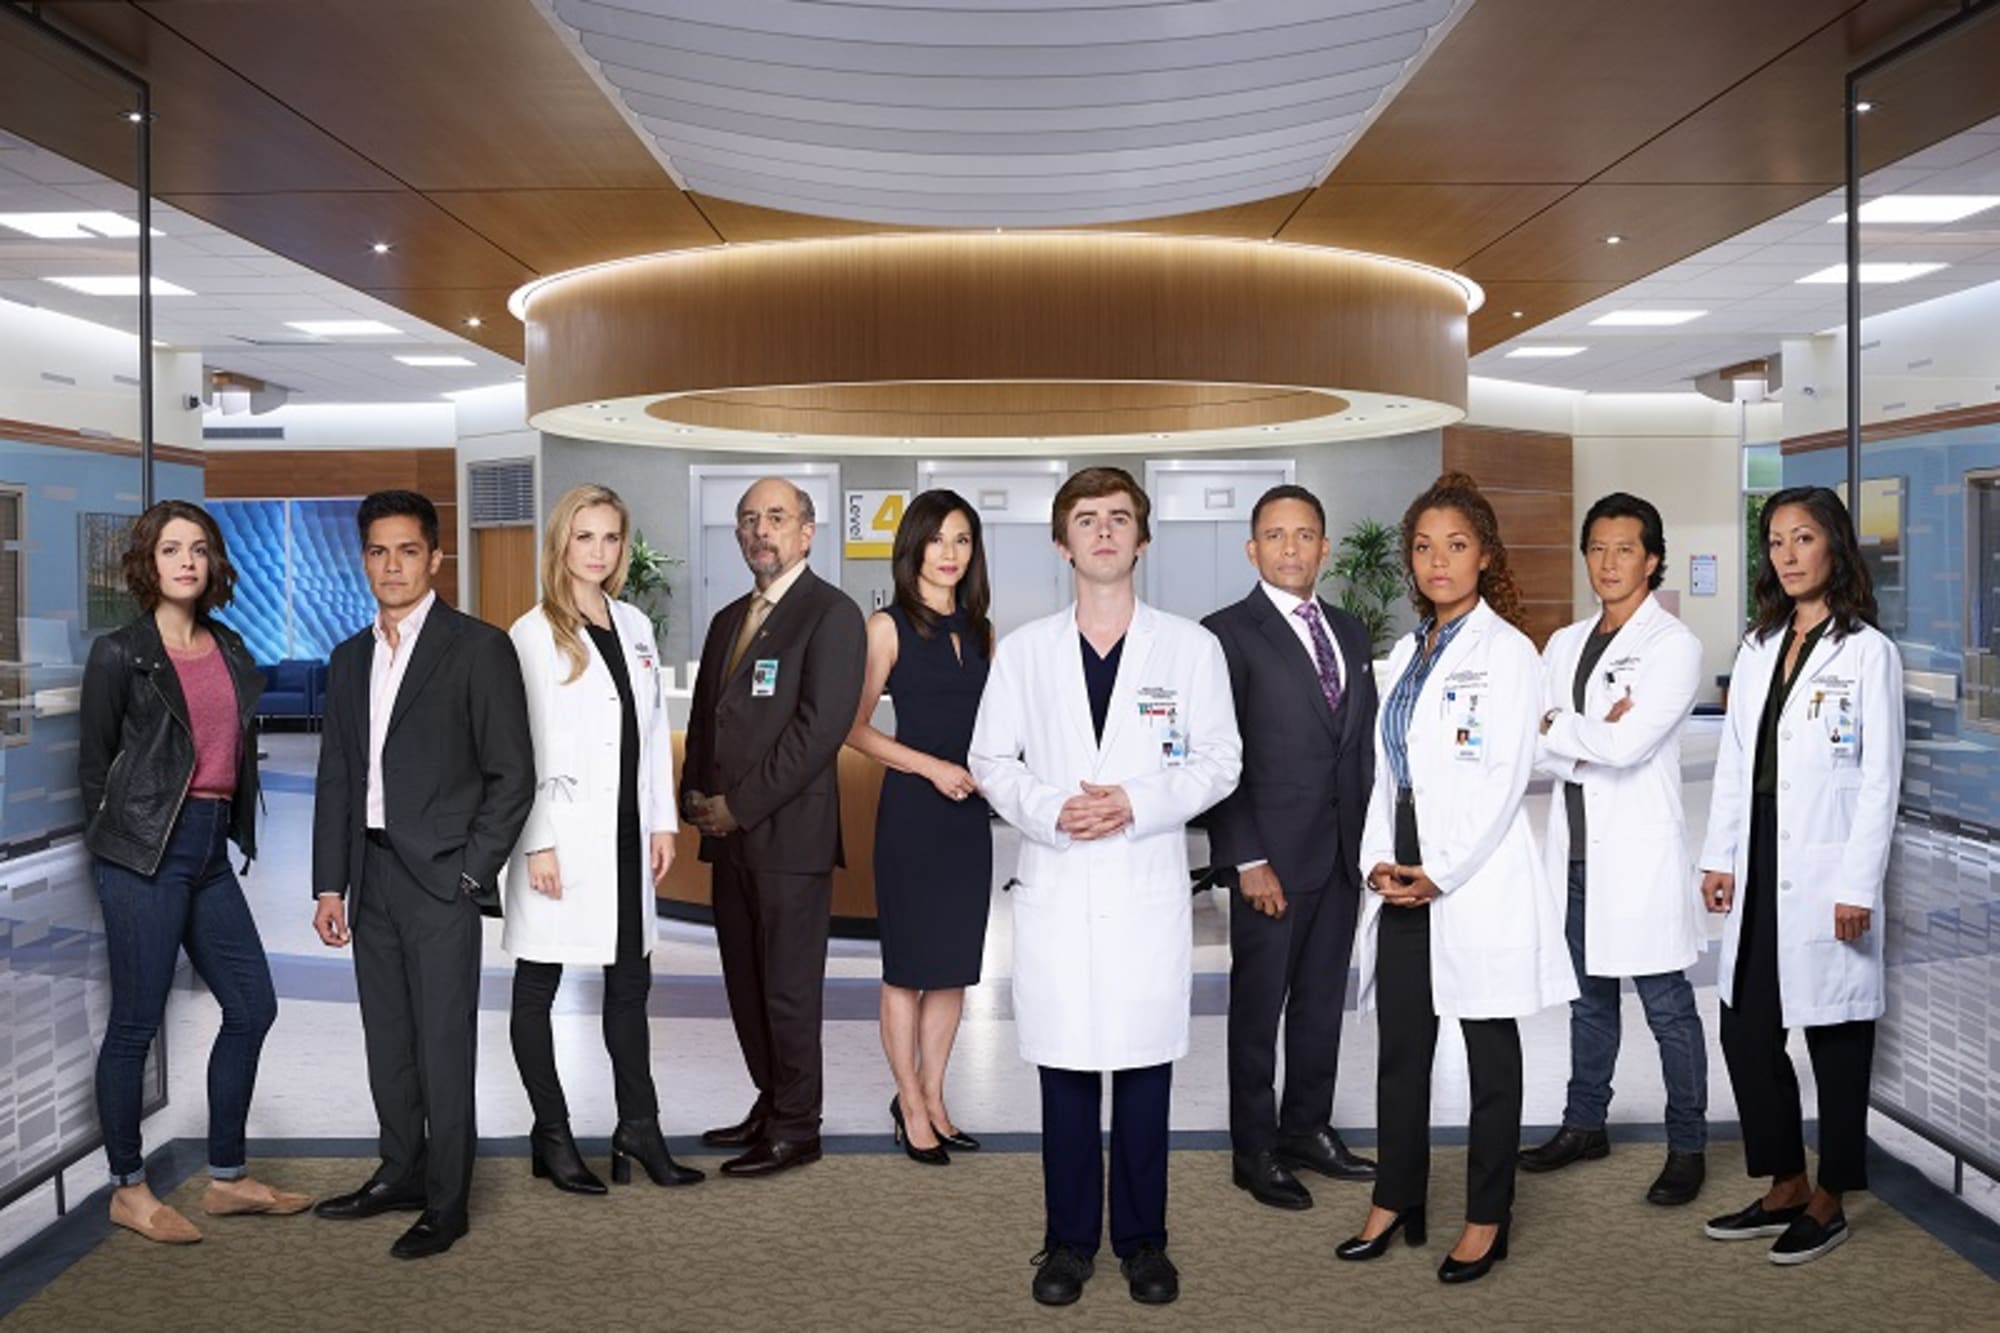 Is The Good Doctor new tonight, Monday January 7?